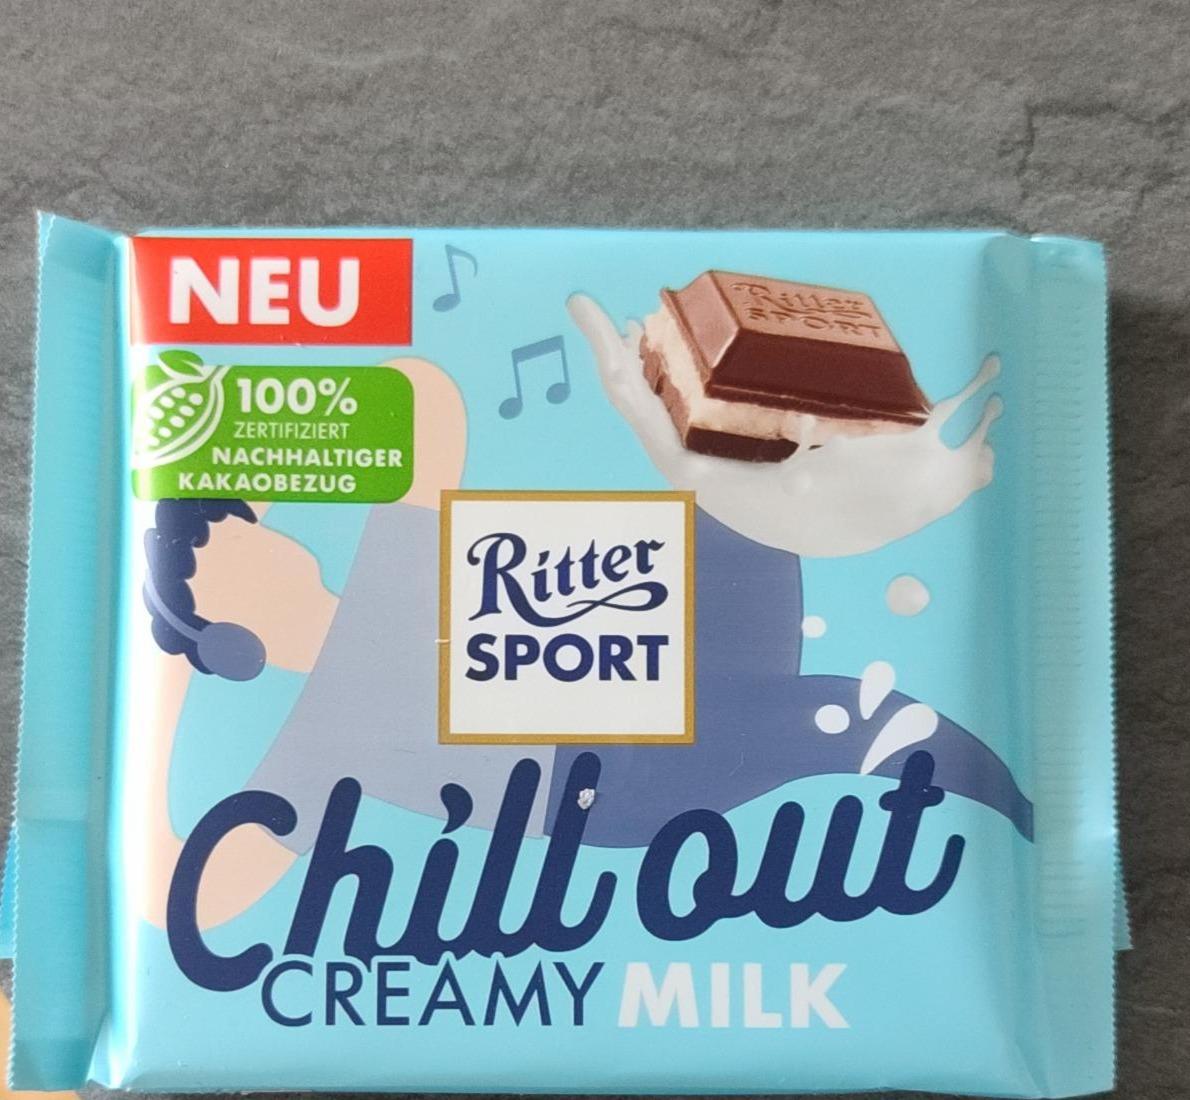 Фото - Chill out creamy milk Ritter sport